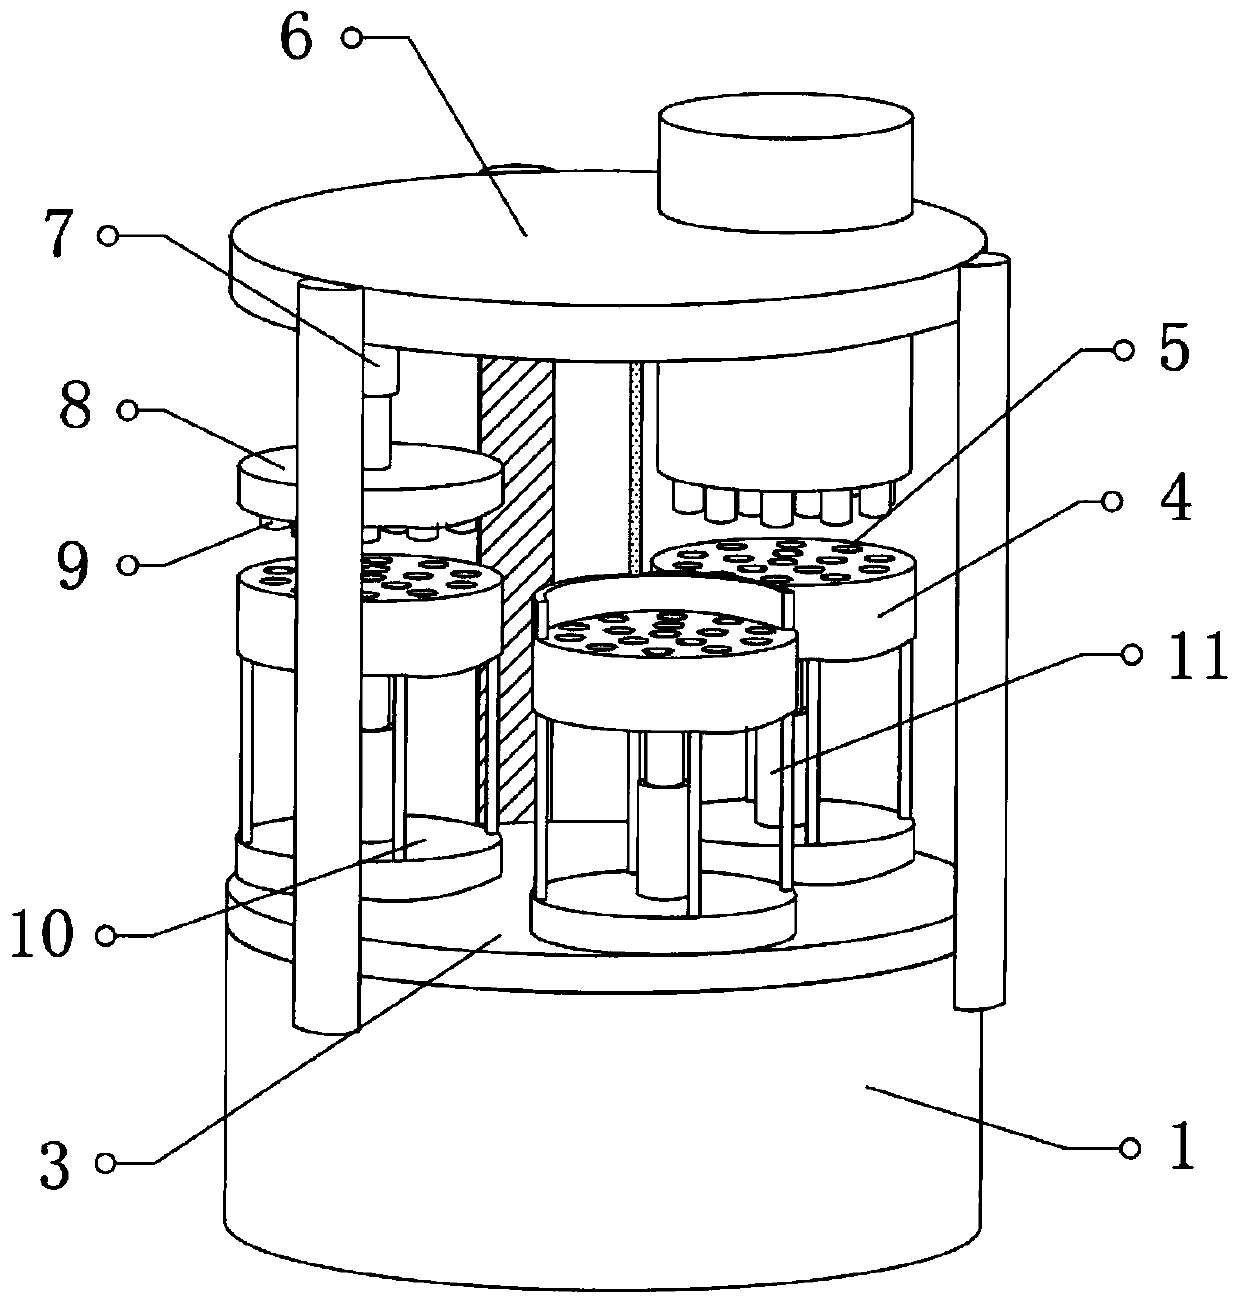 Pharmaceutical tabletting device